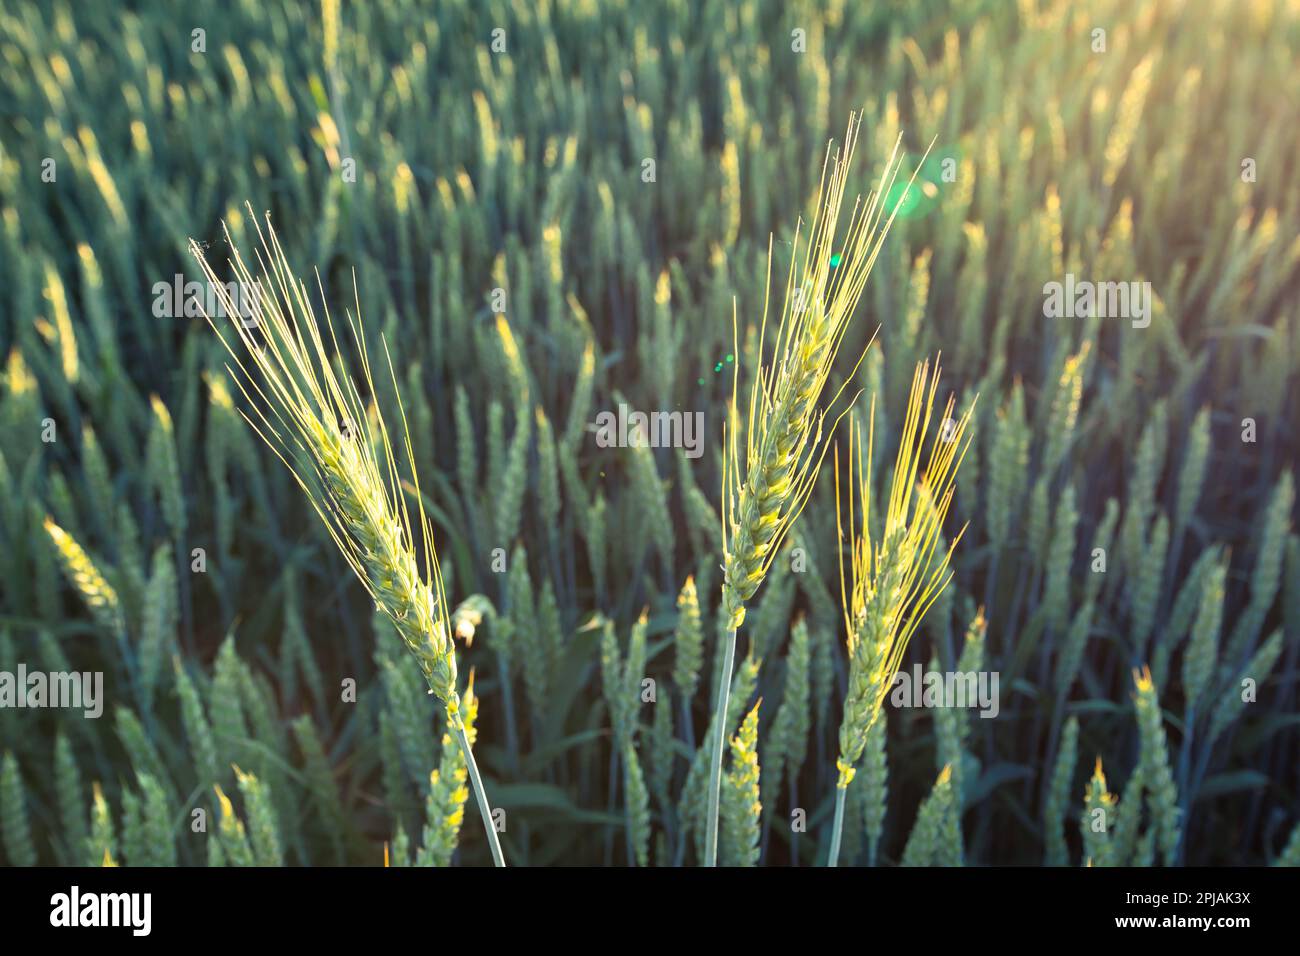 Experience the beauty of nature's renewal with this vibrant view of young wheat stalks bursting with life in the springtime. A reminder that every spr Stock Photo